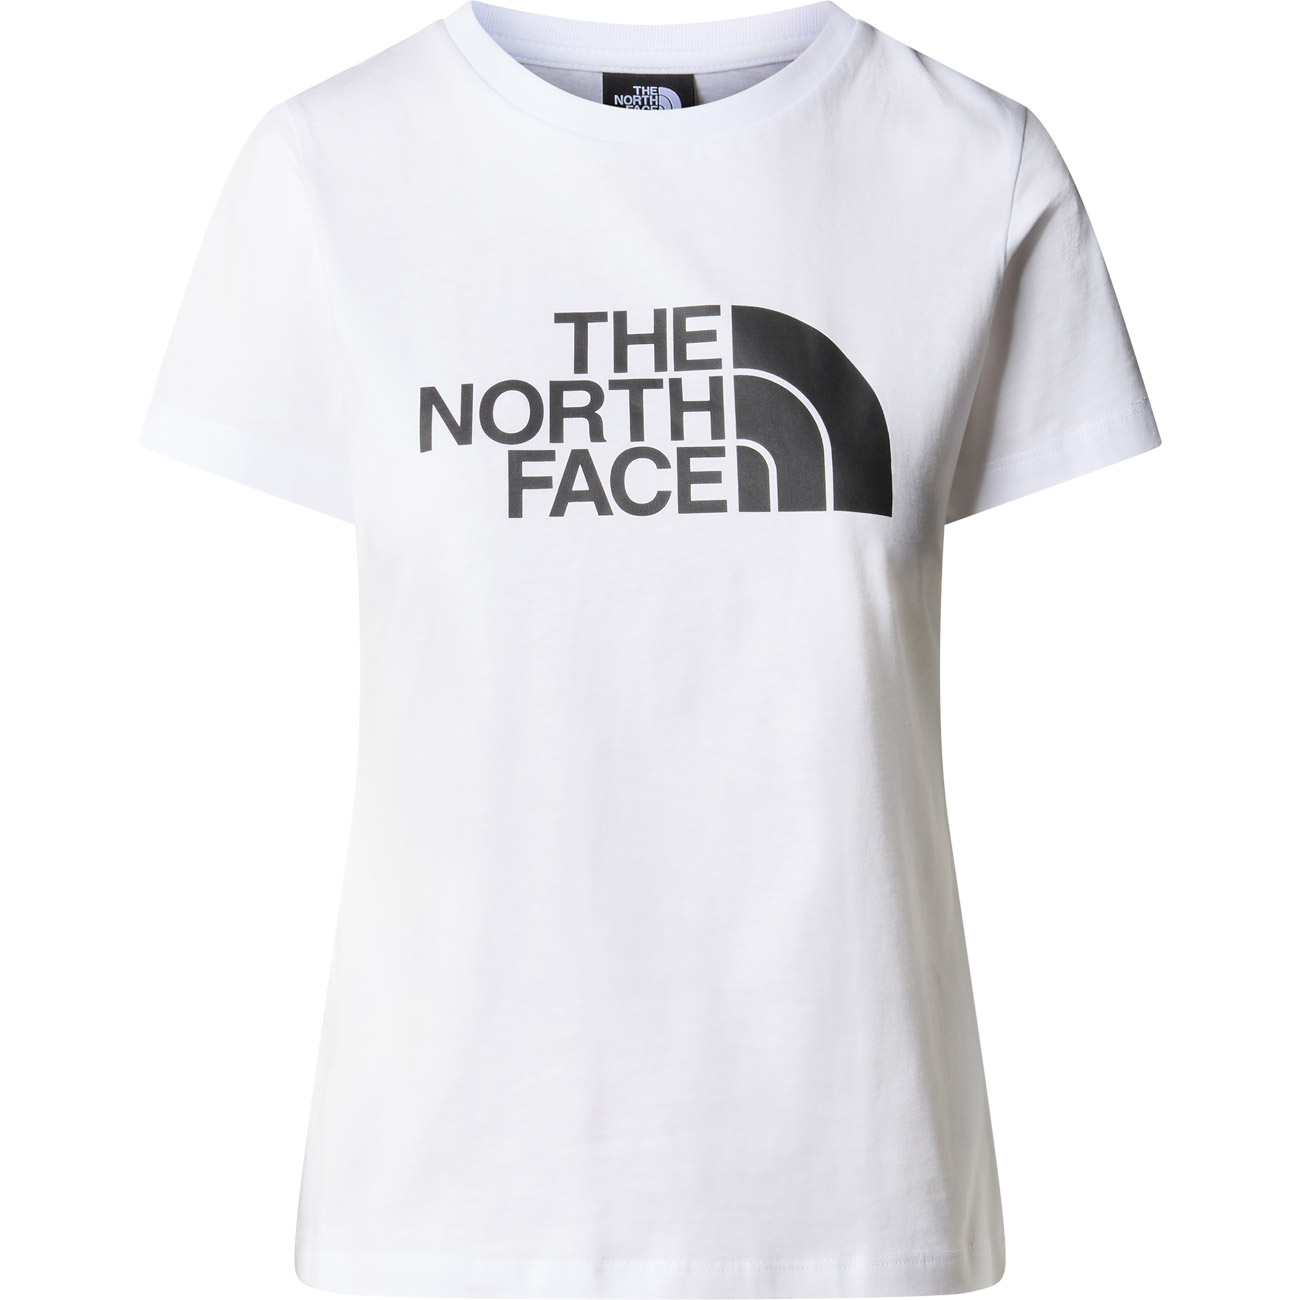 The North Face Damen T-Shirt W's EASY von The North Face